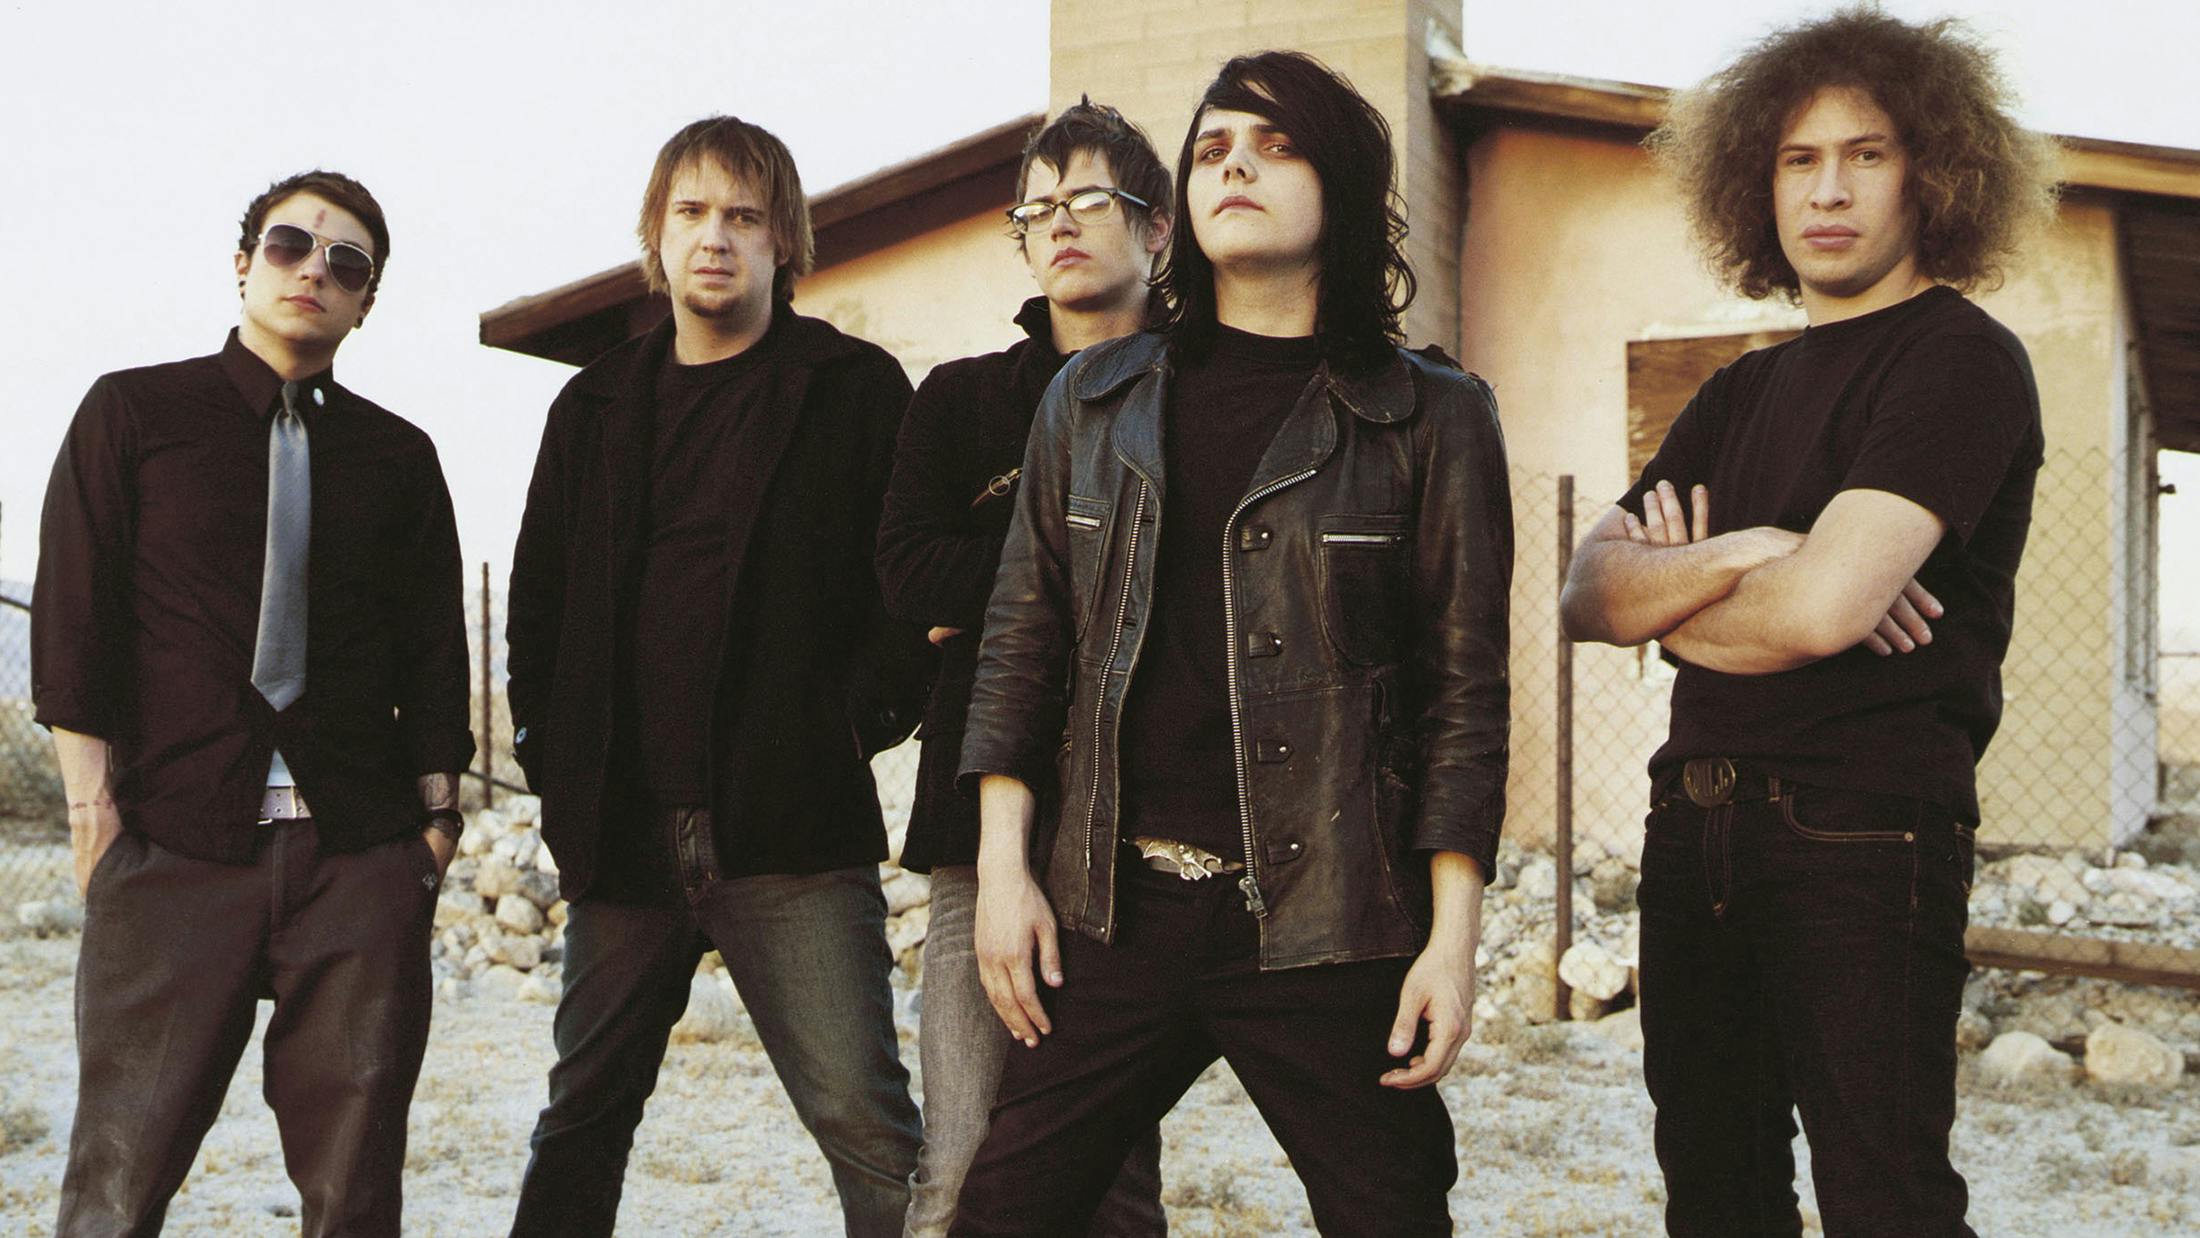 10 key moments that made My Chemical Romance superstars